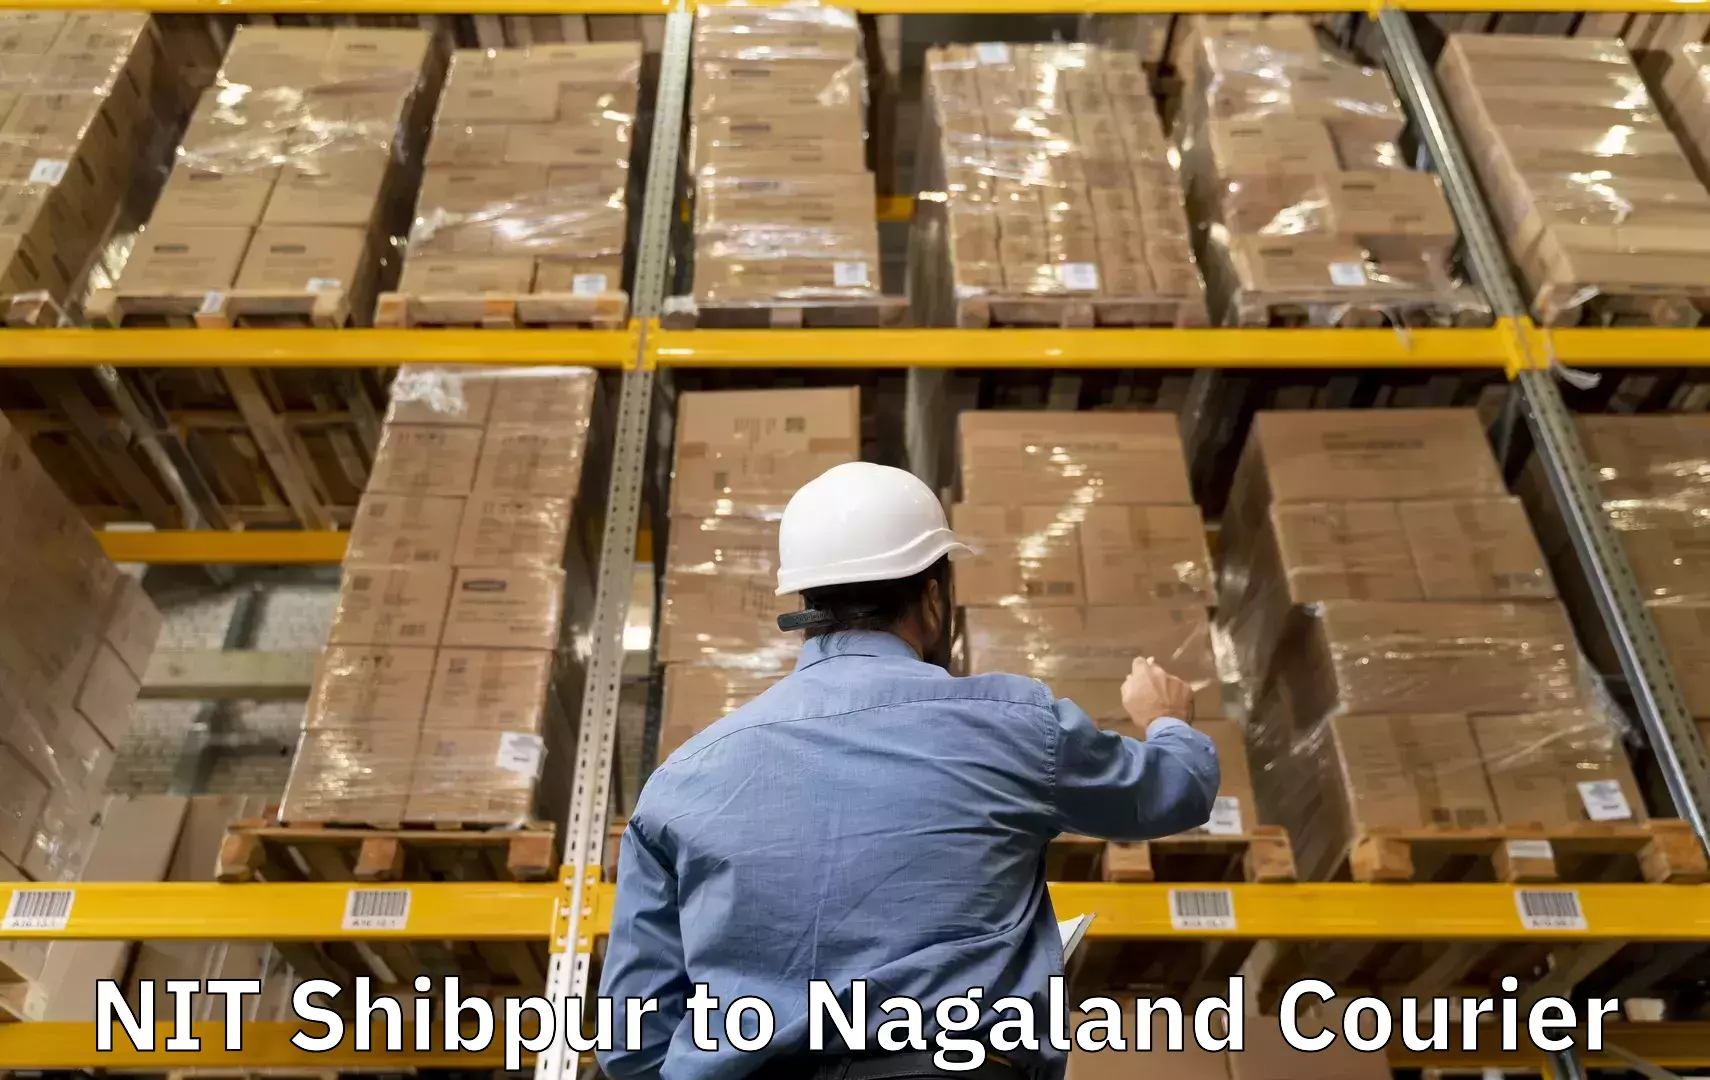 Baggage shipping service in NIT Shibpur to Dimapur